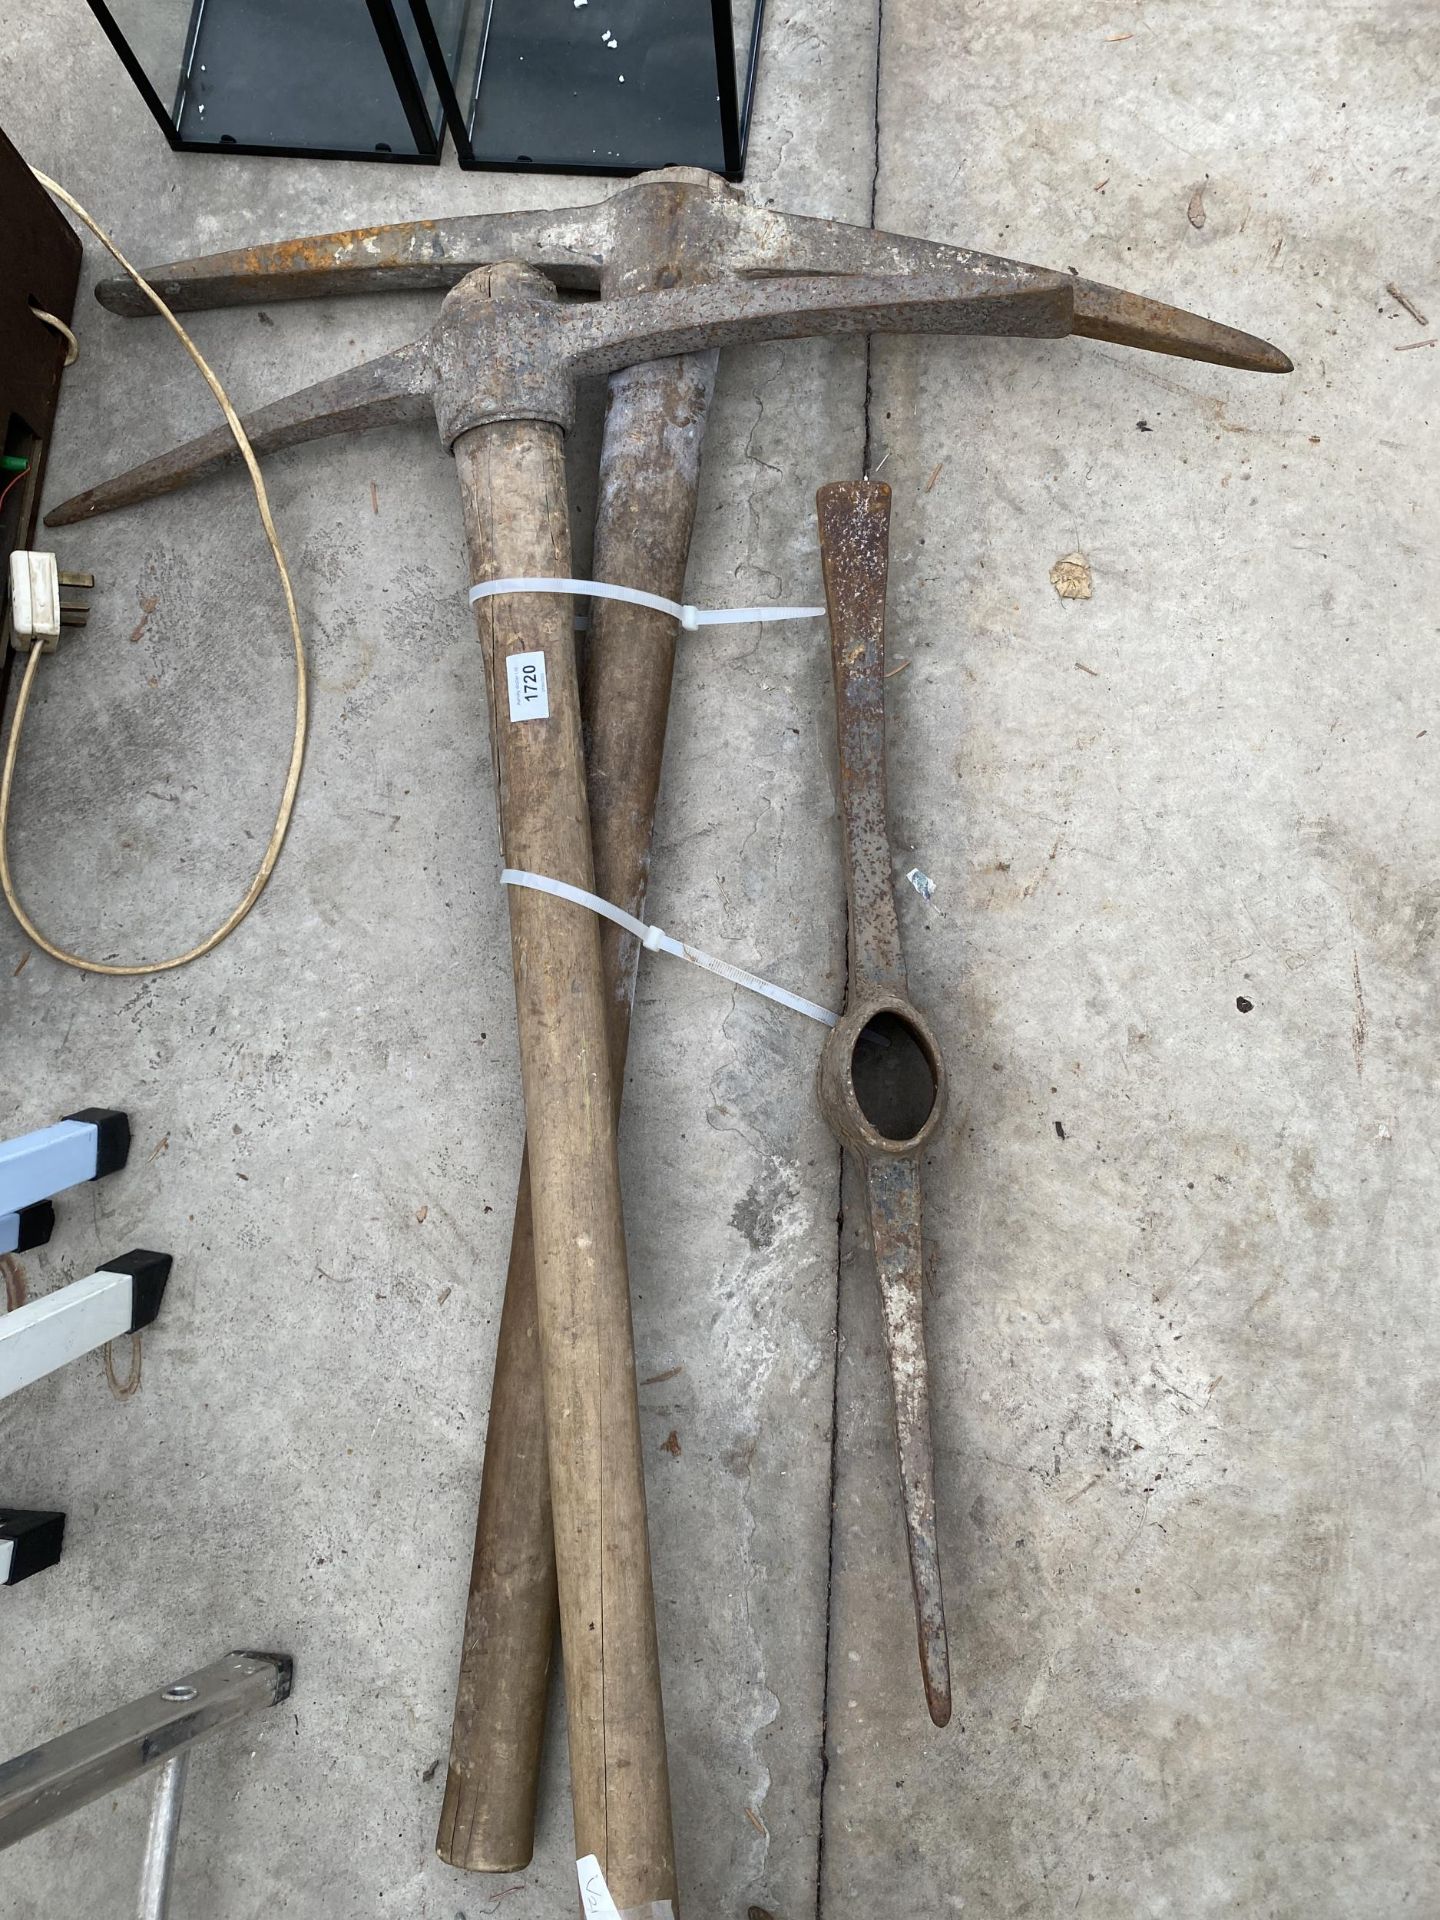 TWO WOODEN HANDLED PICK AXES AND A FURTHER PICK AXE HEAD